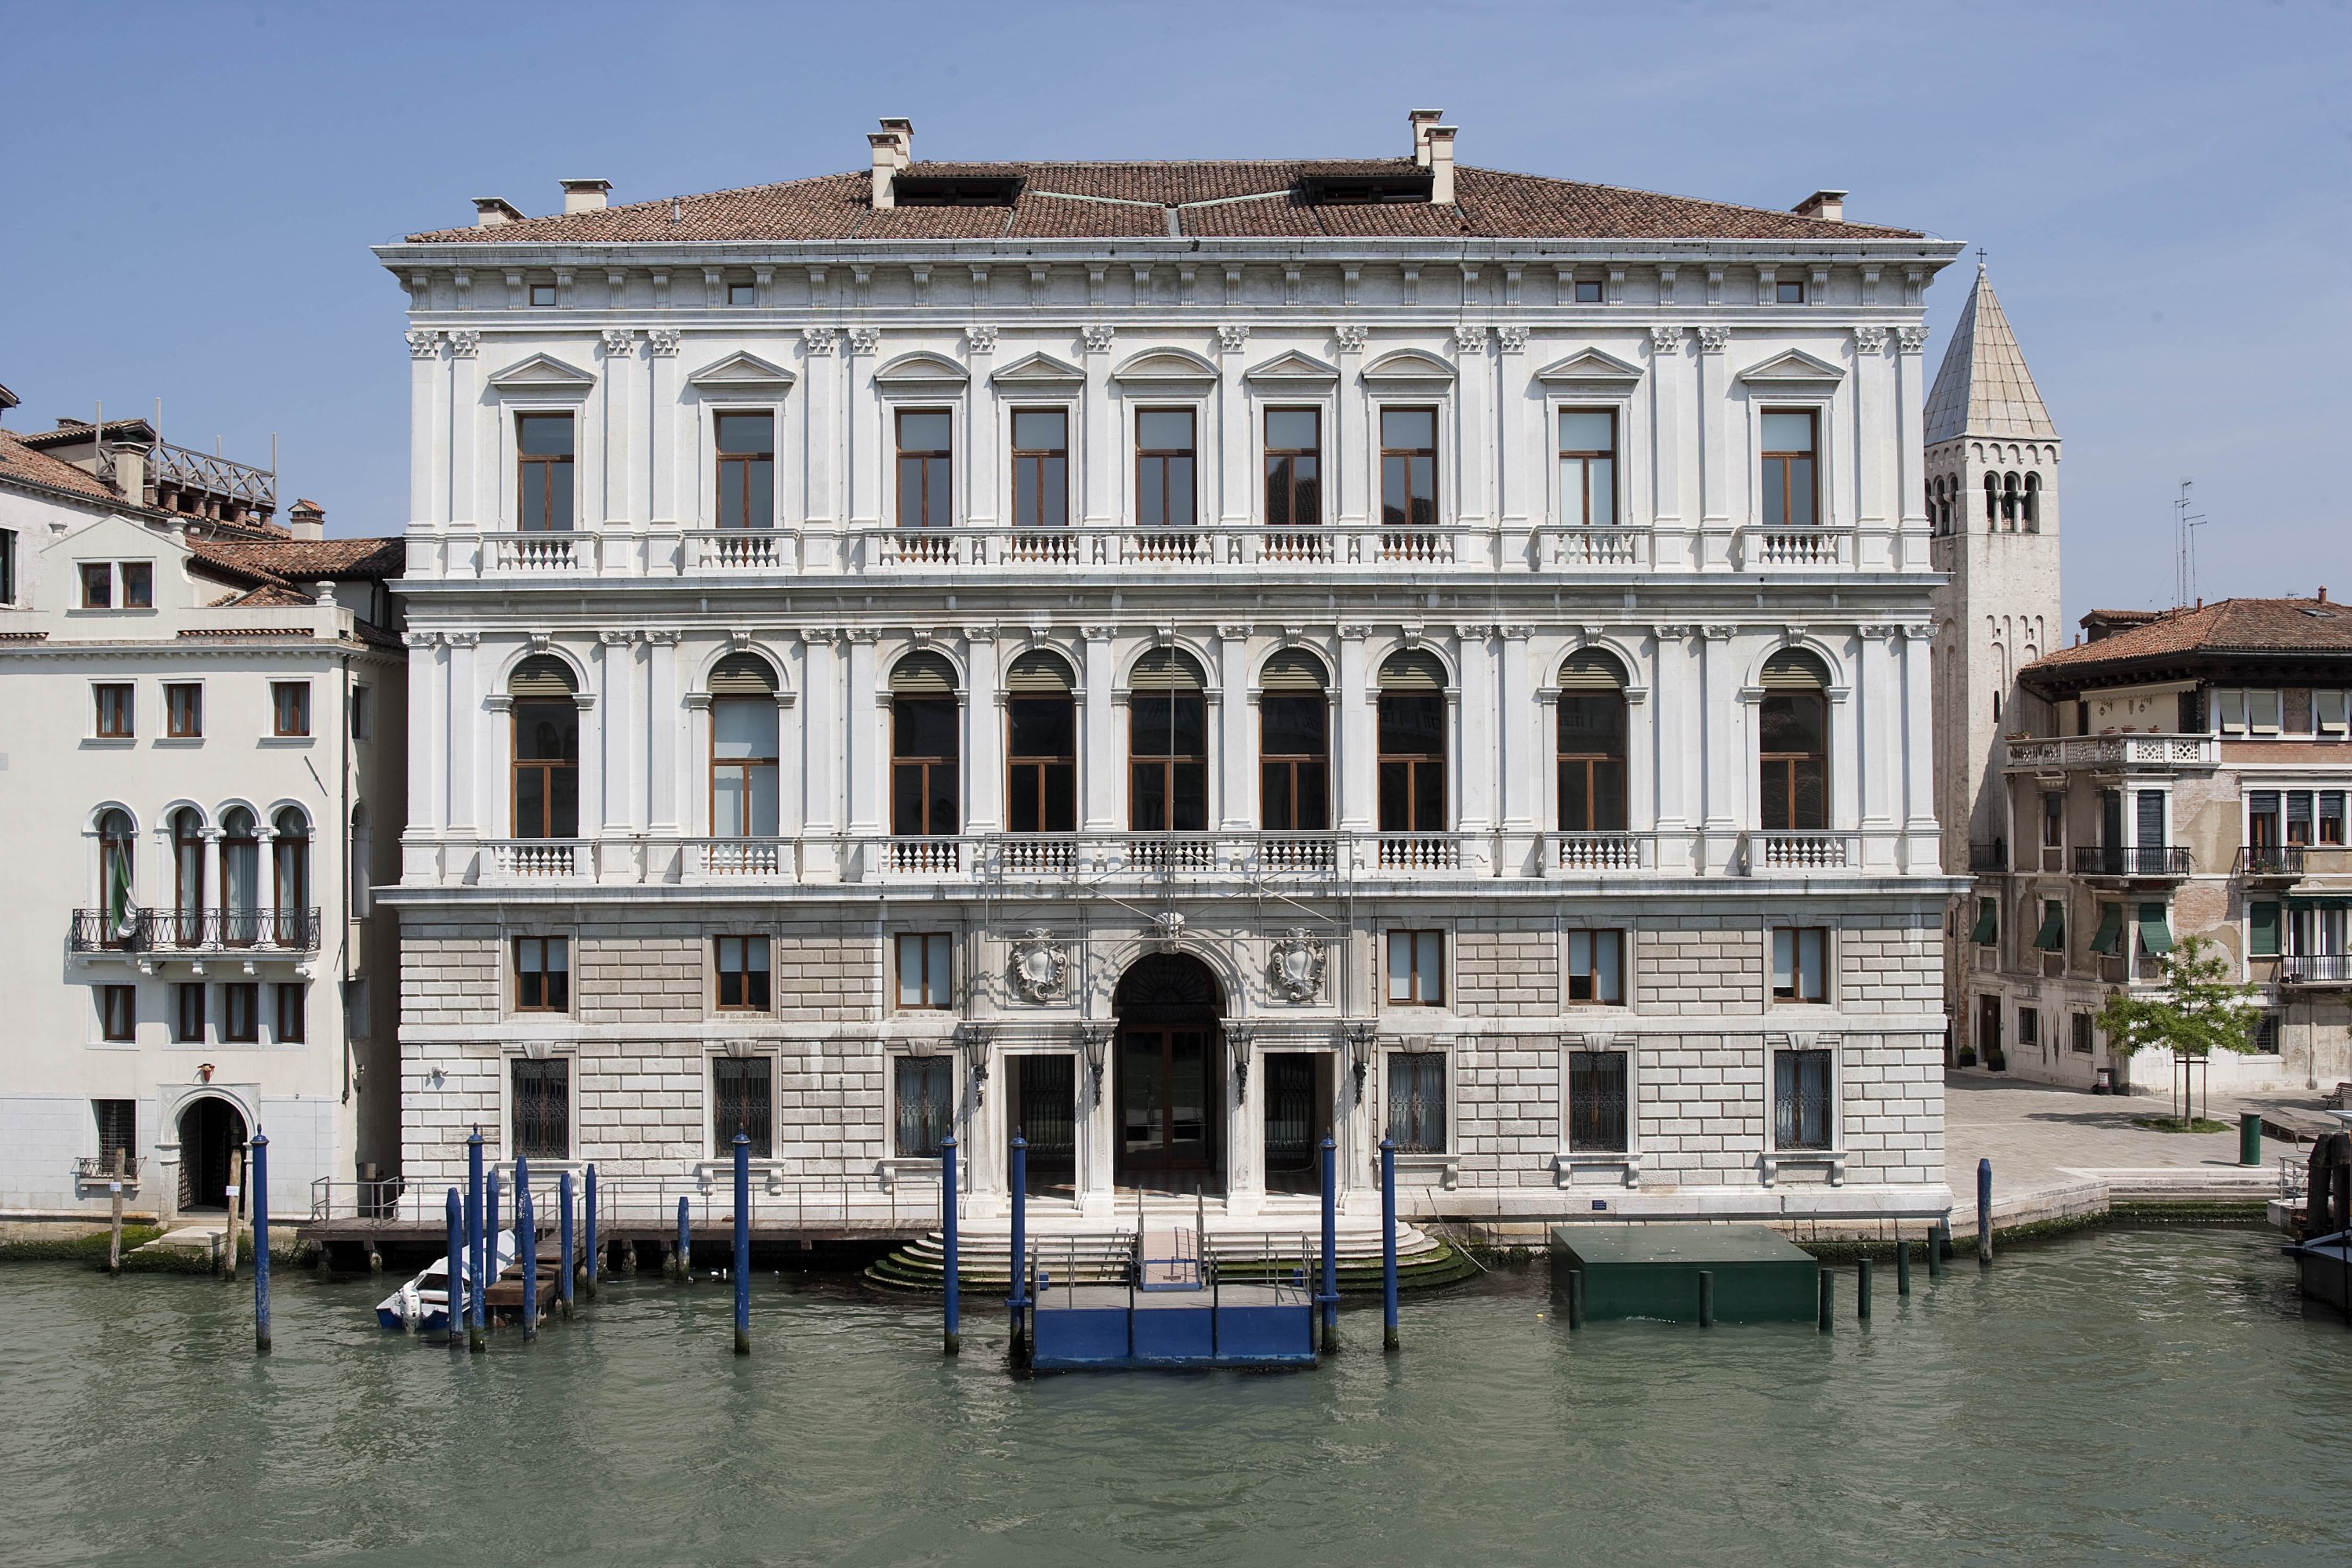 Palazzo Grassi (also known as the Palazzo Grassi-Stucky) is a building in the Venetian Classical style located on the Grand Canal of Venice, Italy. (Photo courtesy of Istanbul Modern)